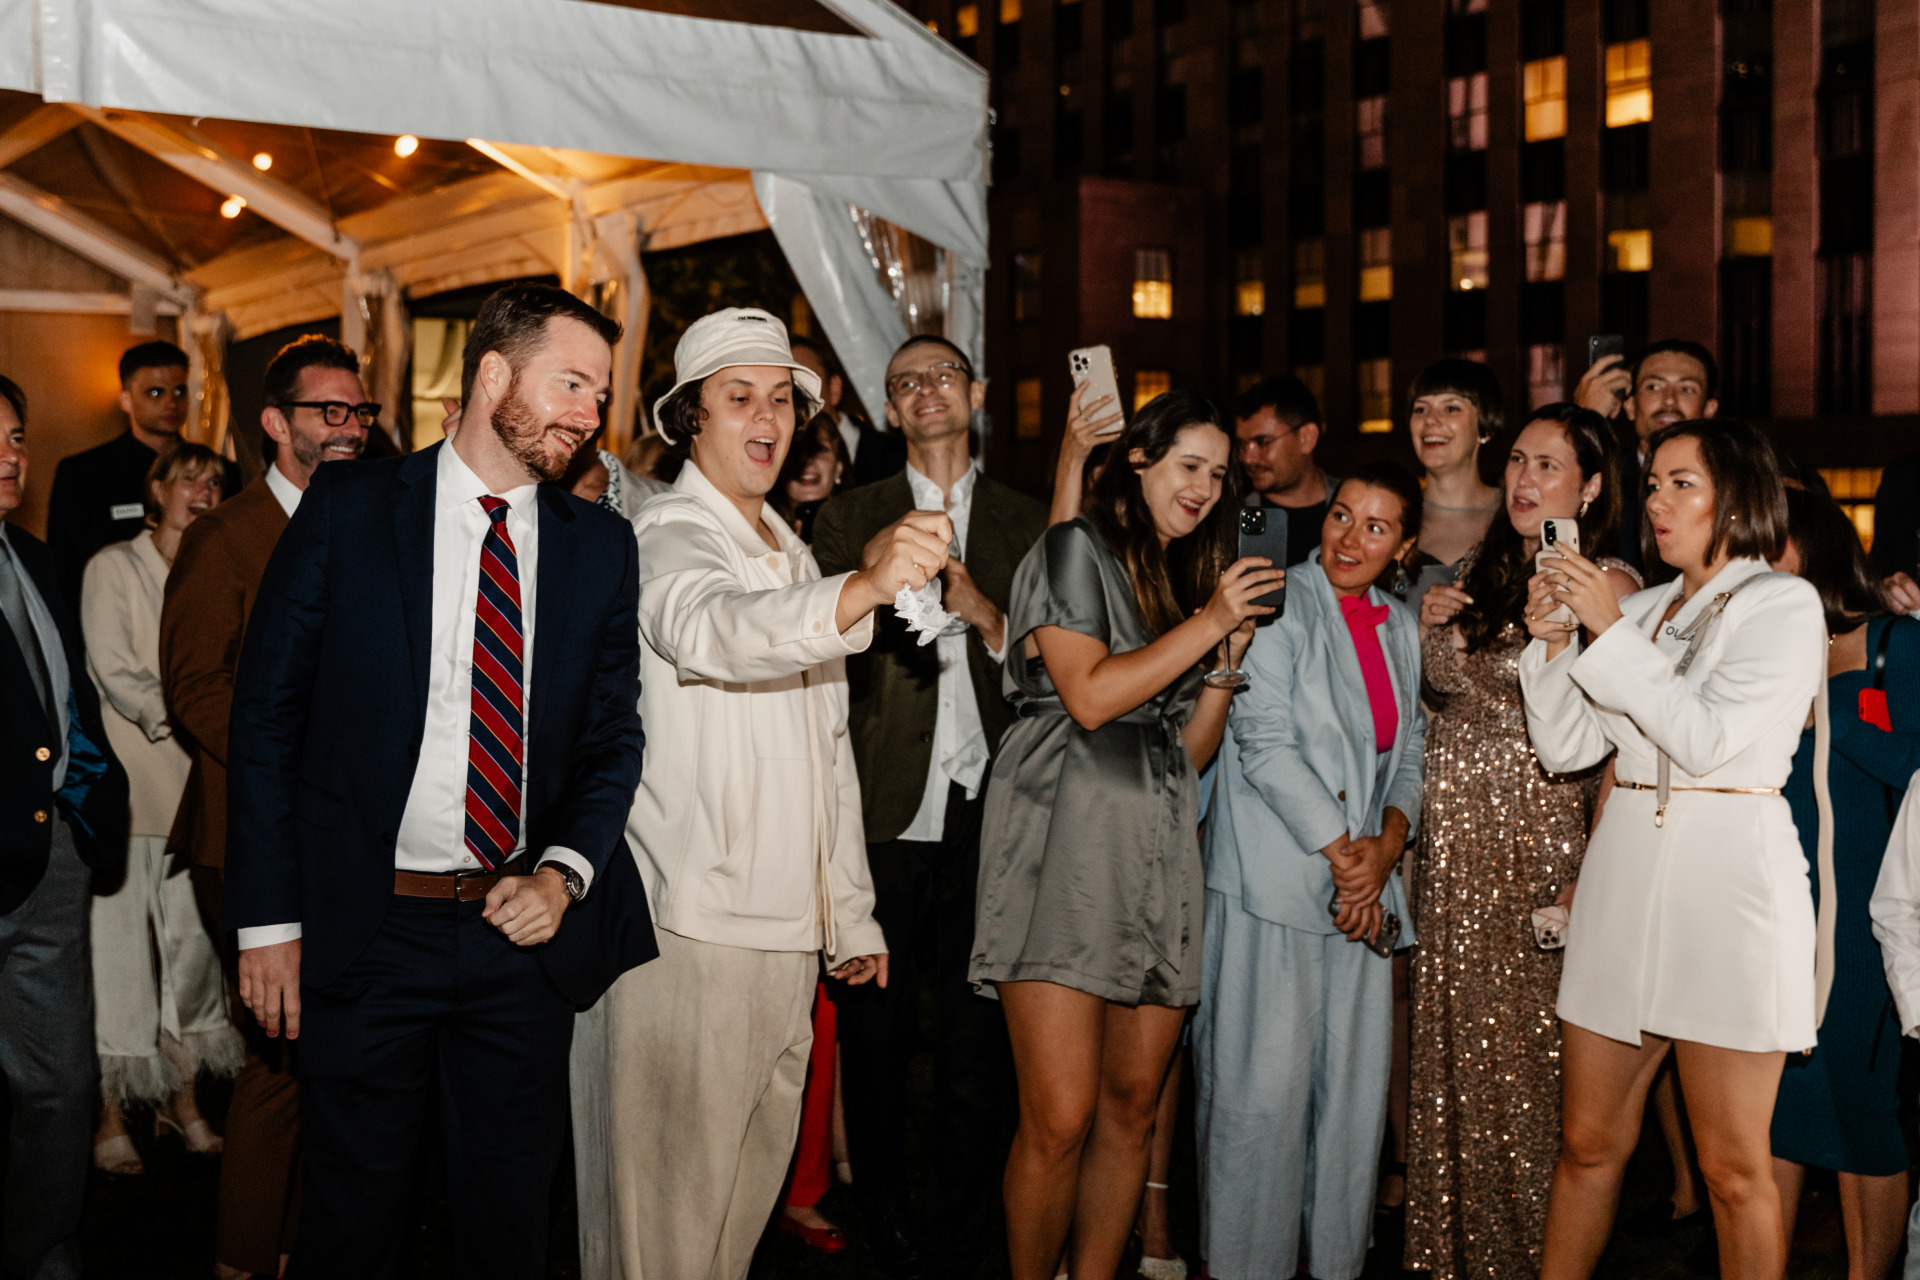 7 Wedding reception in NYC event photographer 11